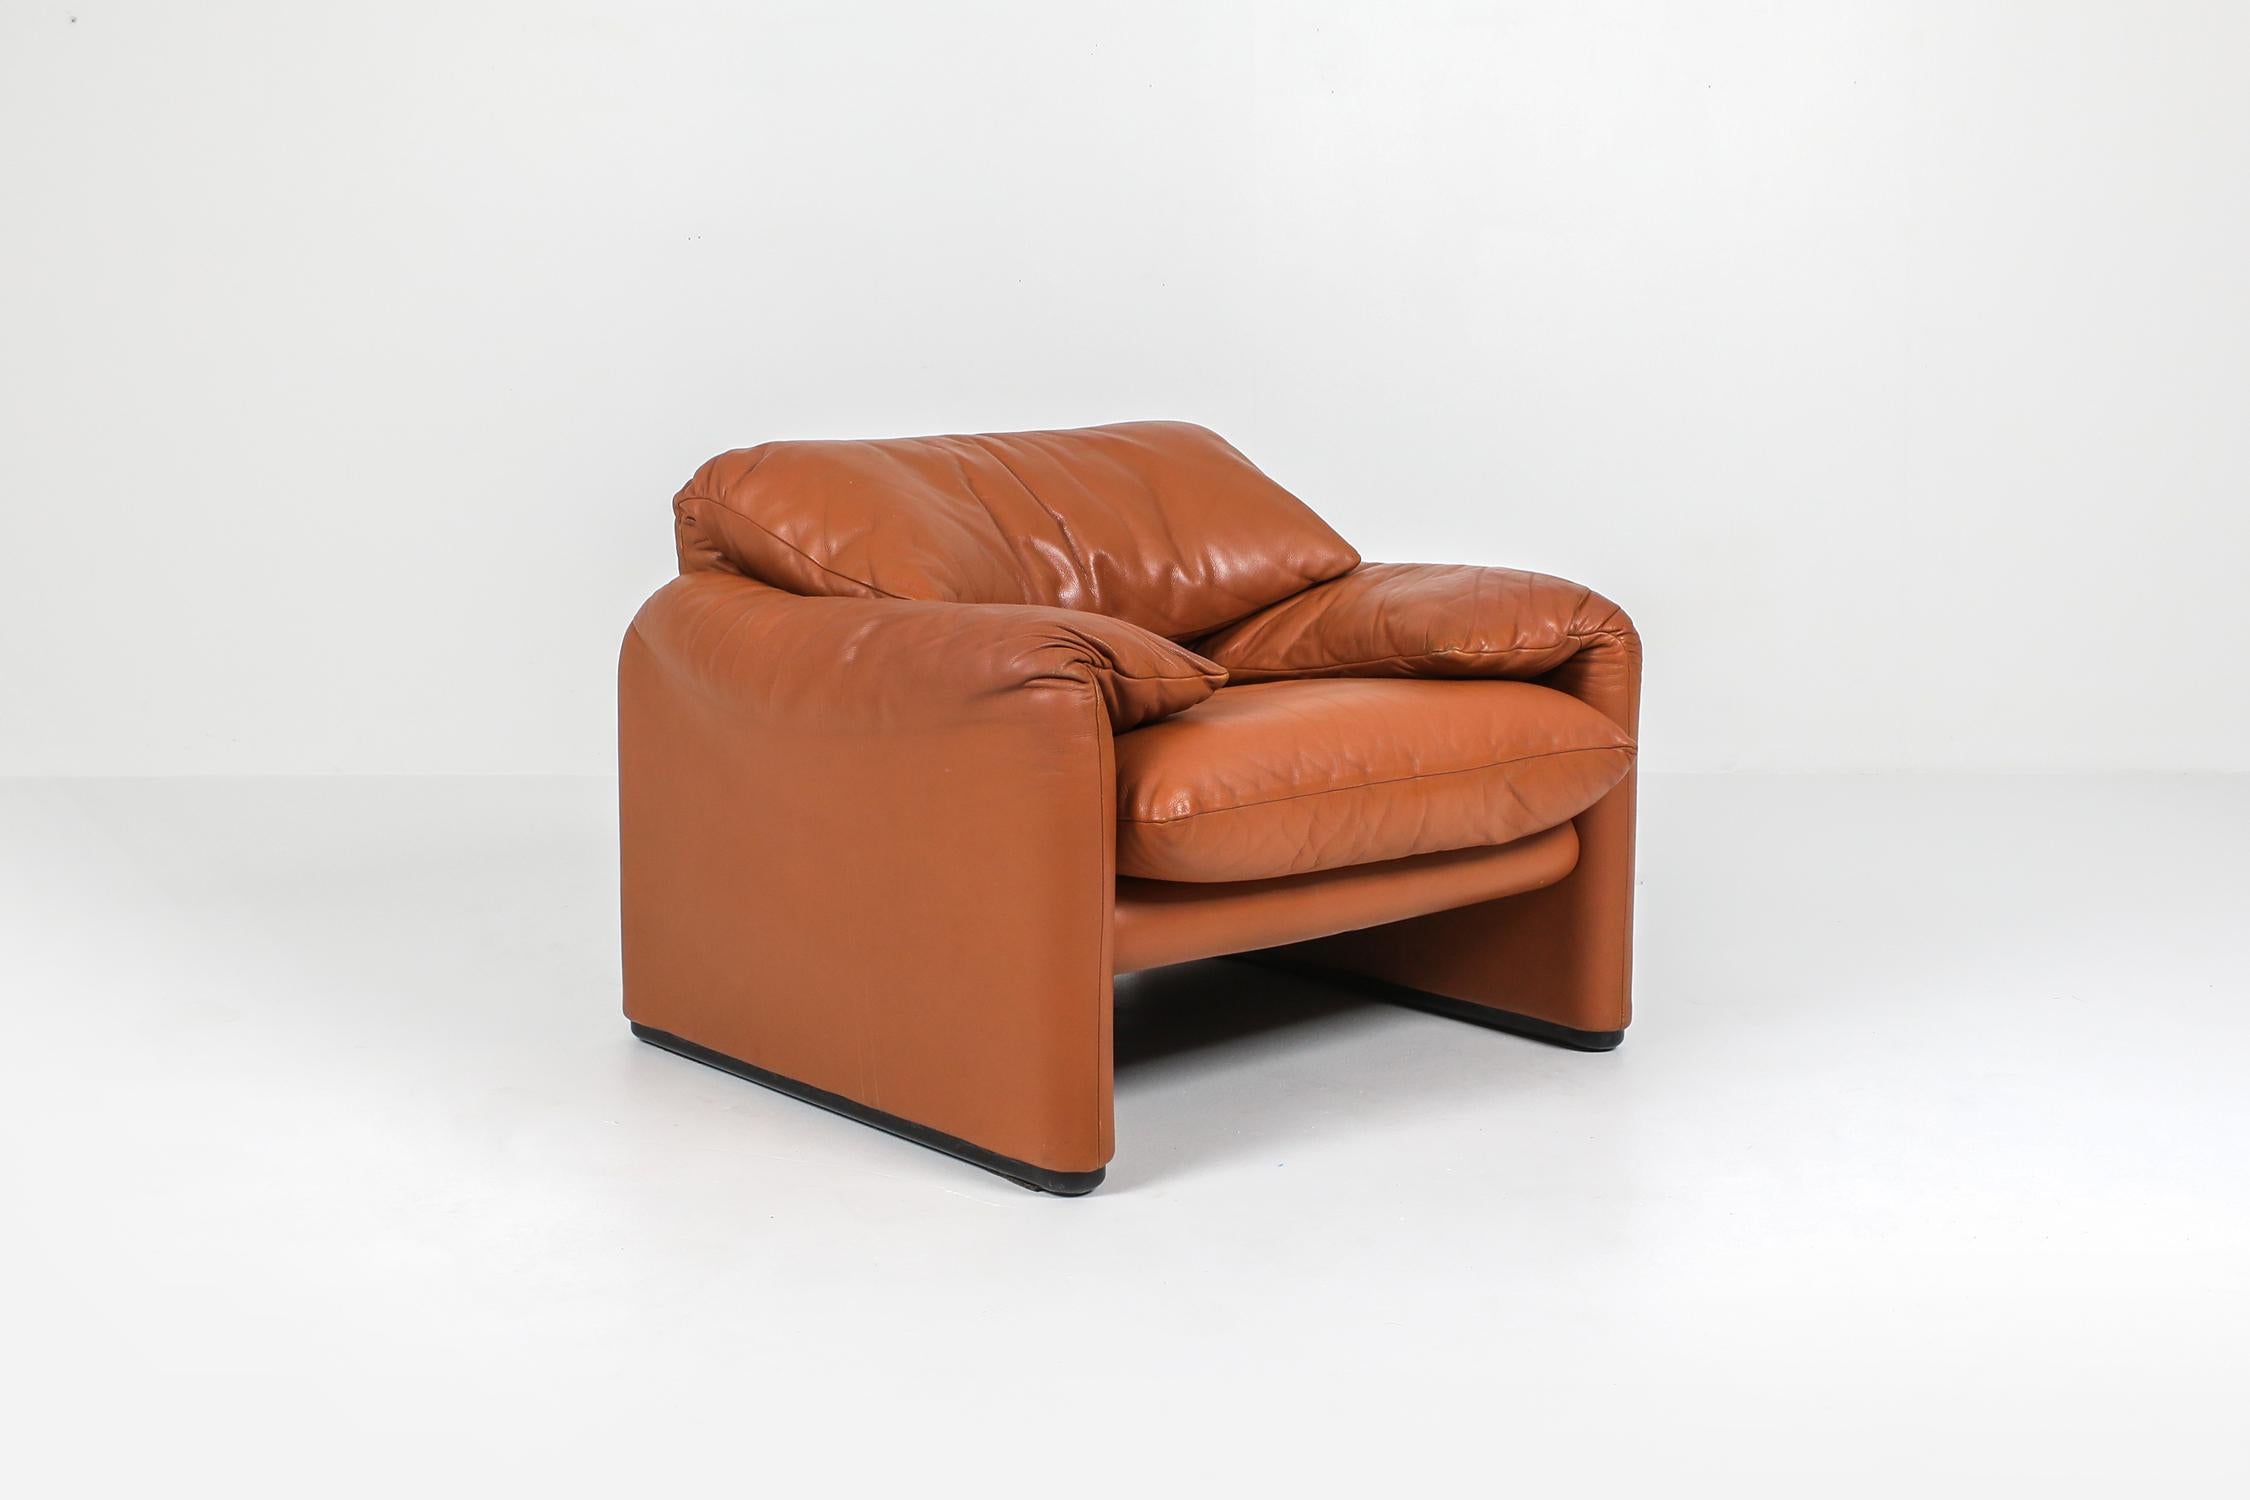 Maralunga Cognac Leather Club Chairs by Vico Magistretti for Cassina, 1974 2